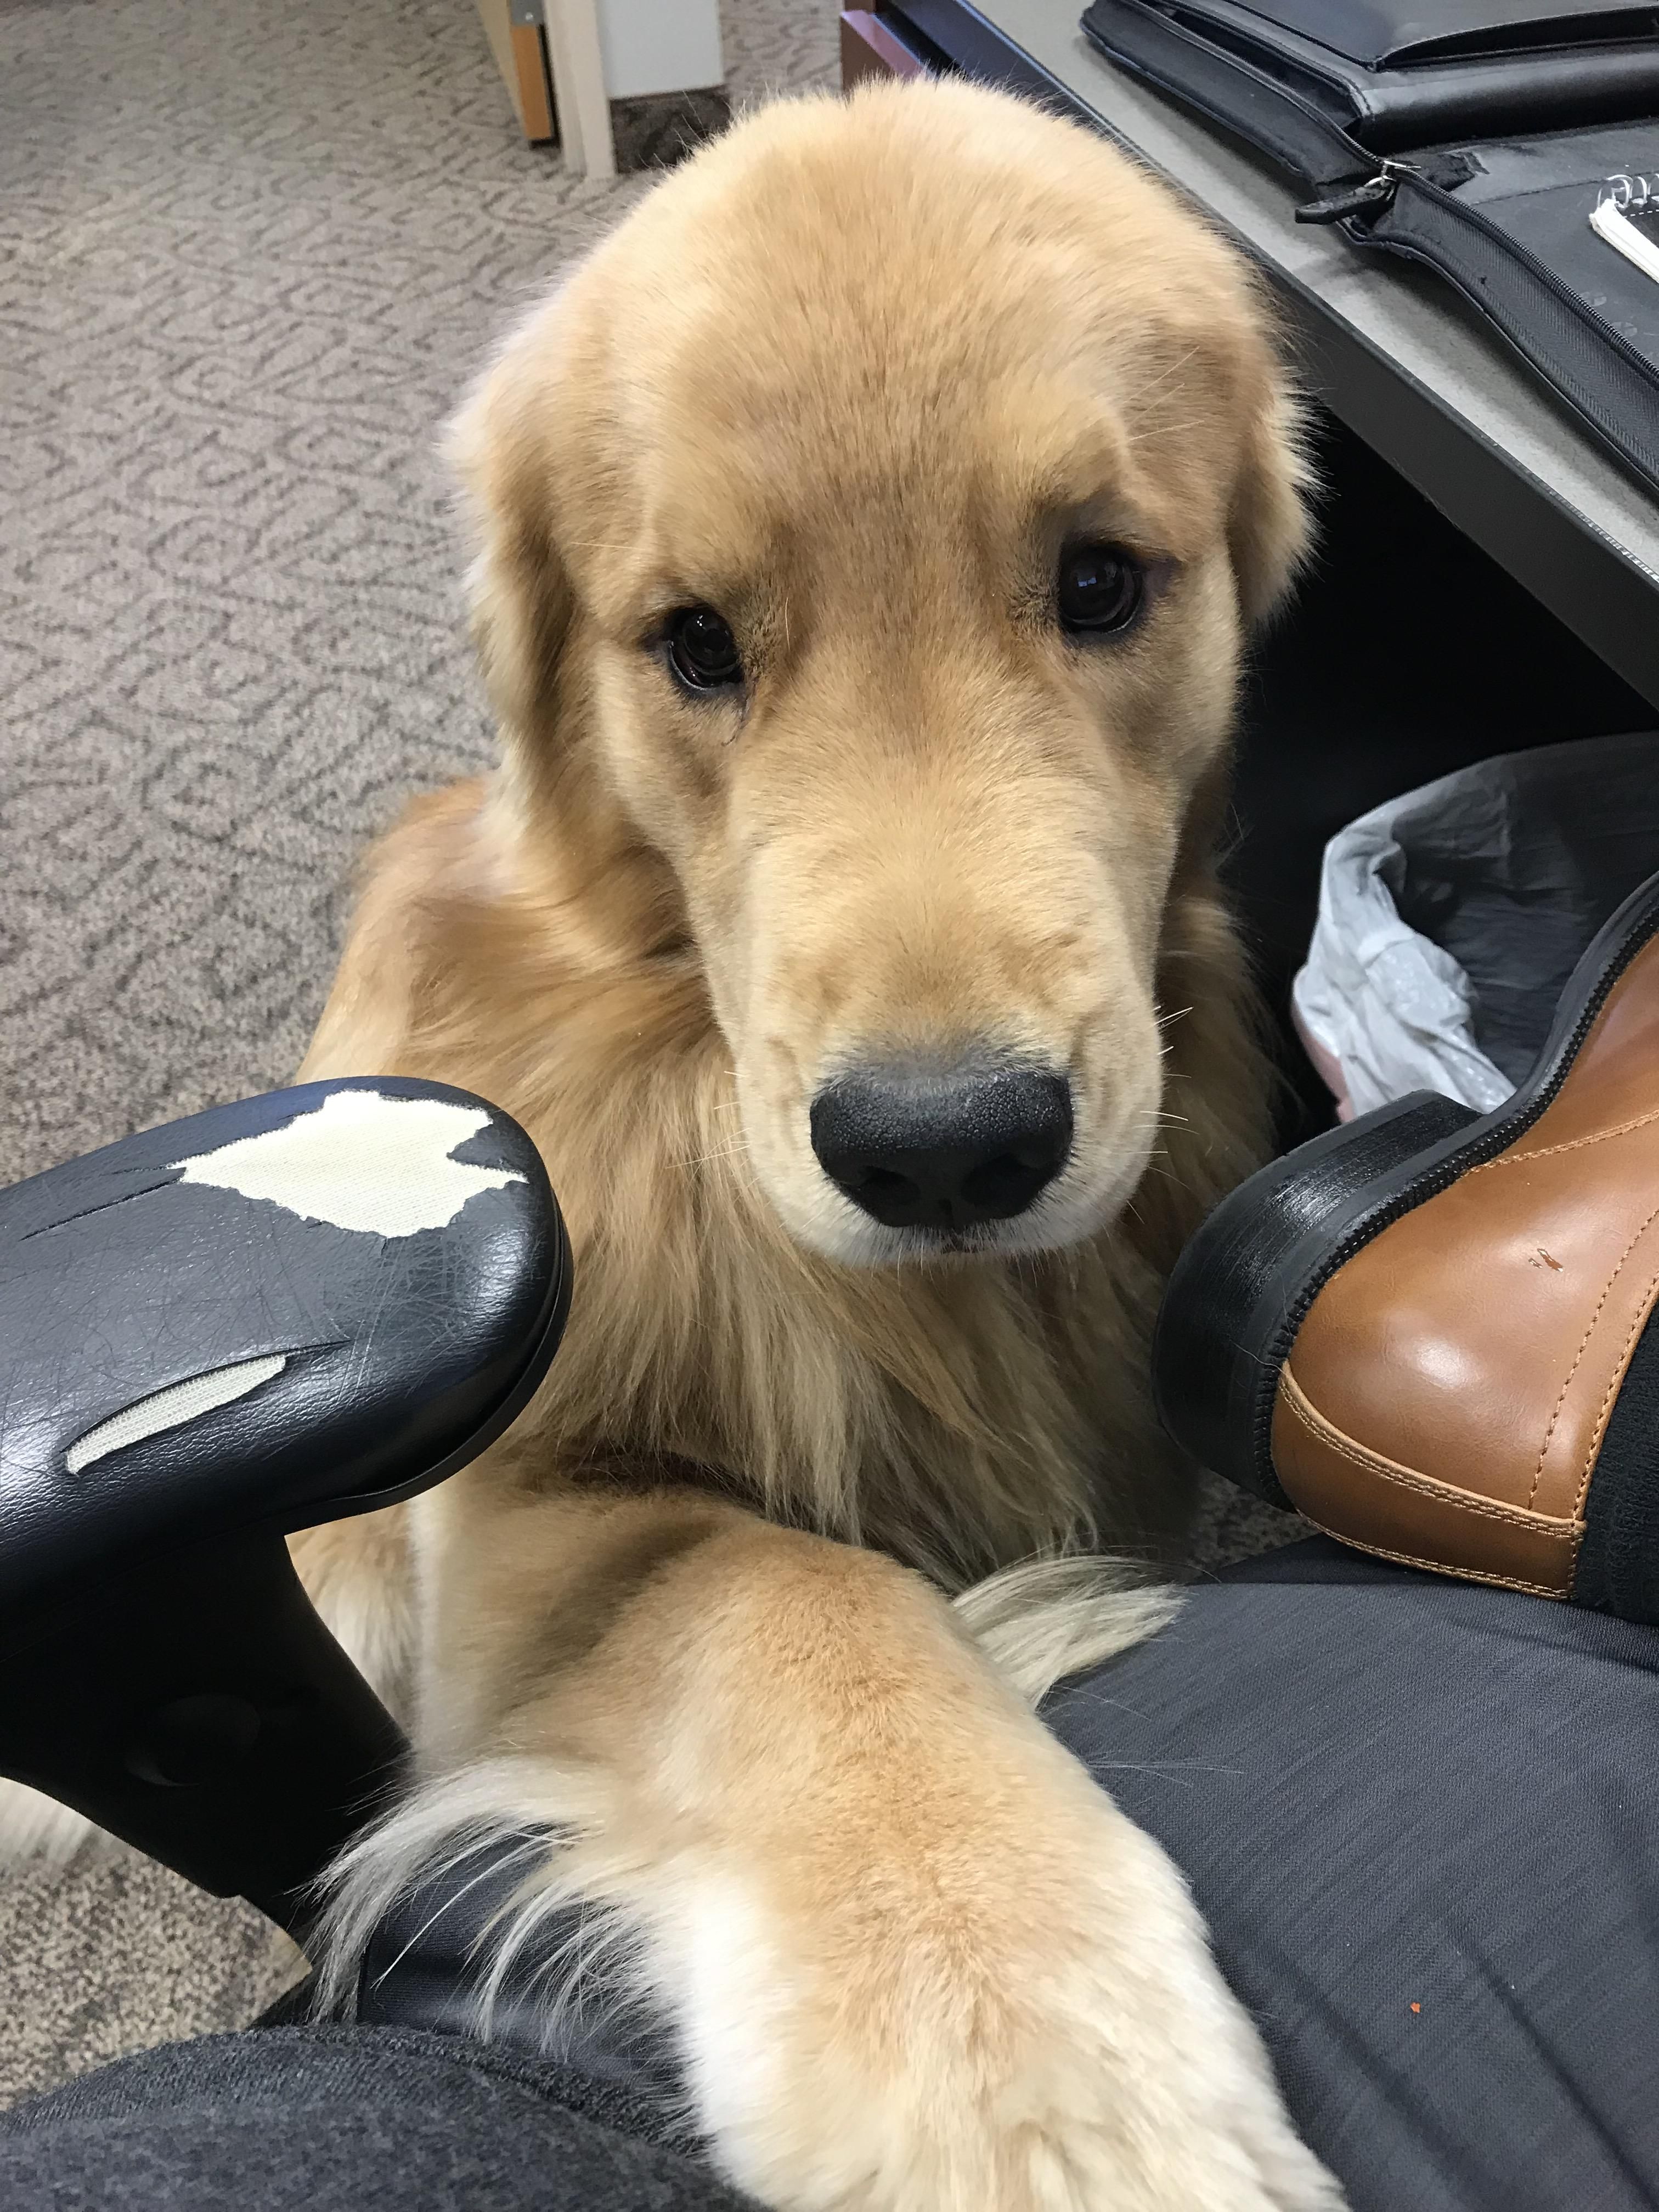 We have an office dog and he visited me today.